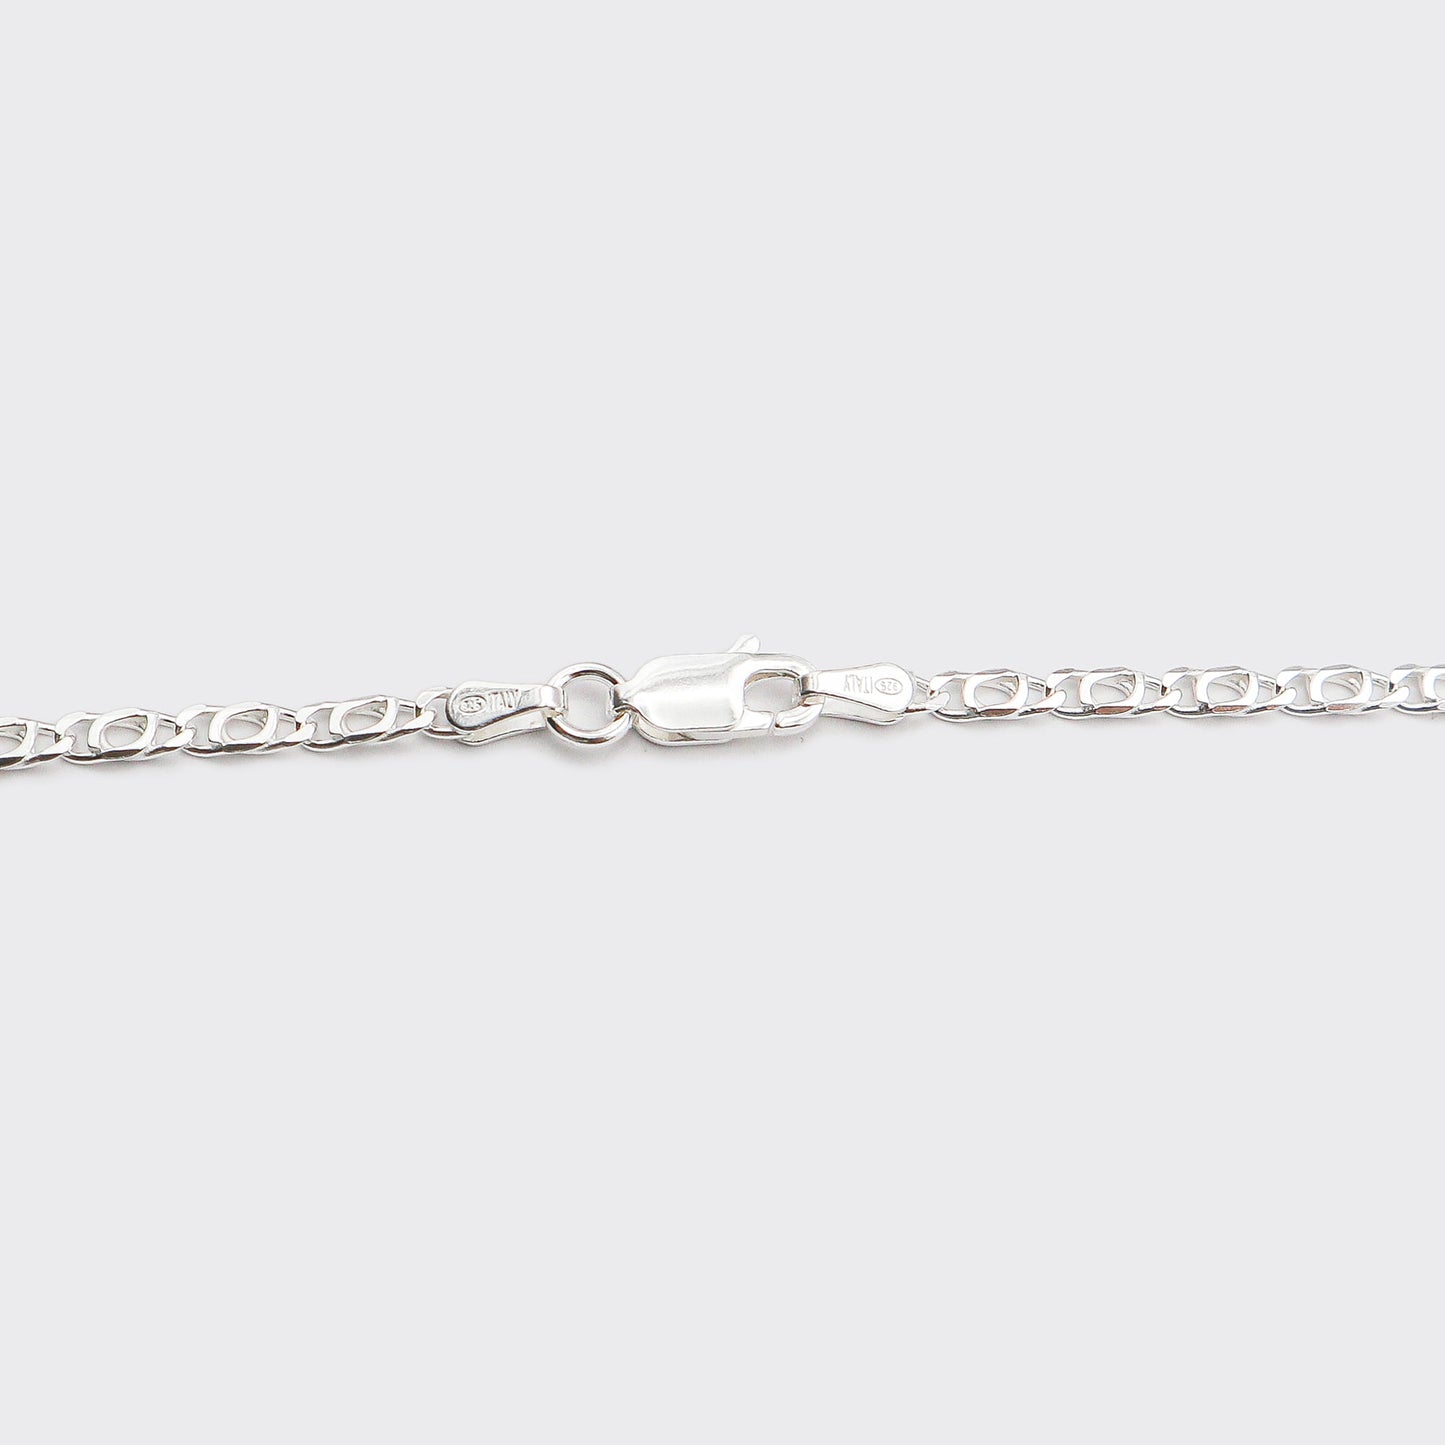 The Cartridge chain is an elegant and unisex piece of jewelry, crafted in Italy and made of 925 Sterling Silver. Every jewelry is designed by Atelier Domingo's in France and is made to be worn by both men and women.